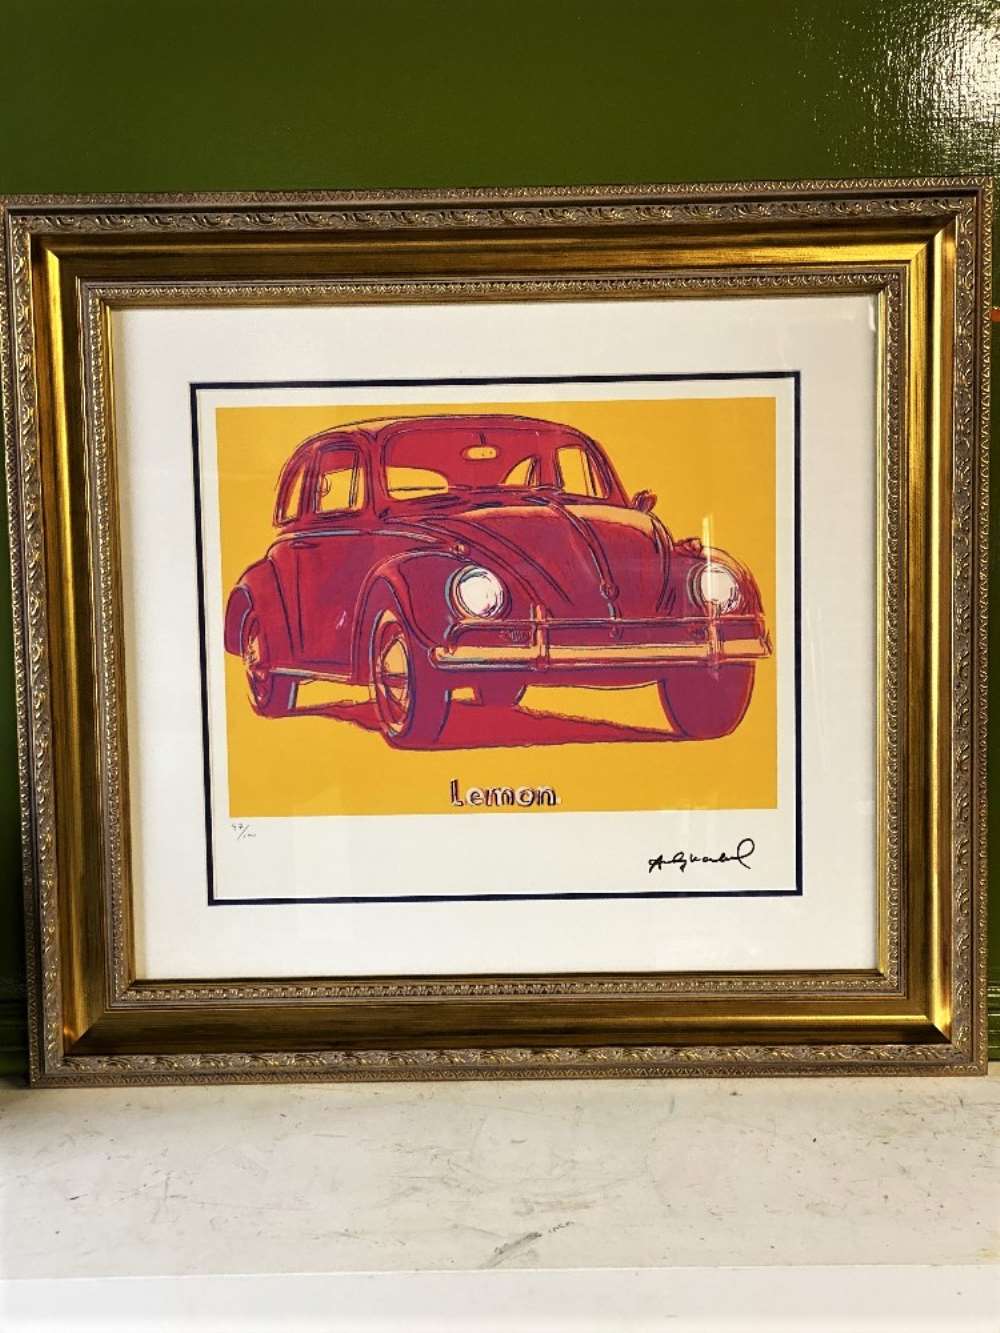 Andy Warhol (1928-1987) “The Beetle” Leo Castelli Gallery-New York Numbered Ltd Edition of 100 Litho - Image 5 of 5